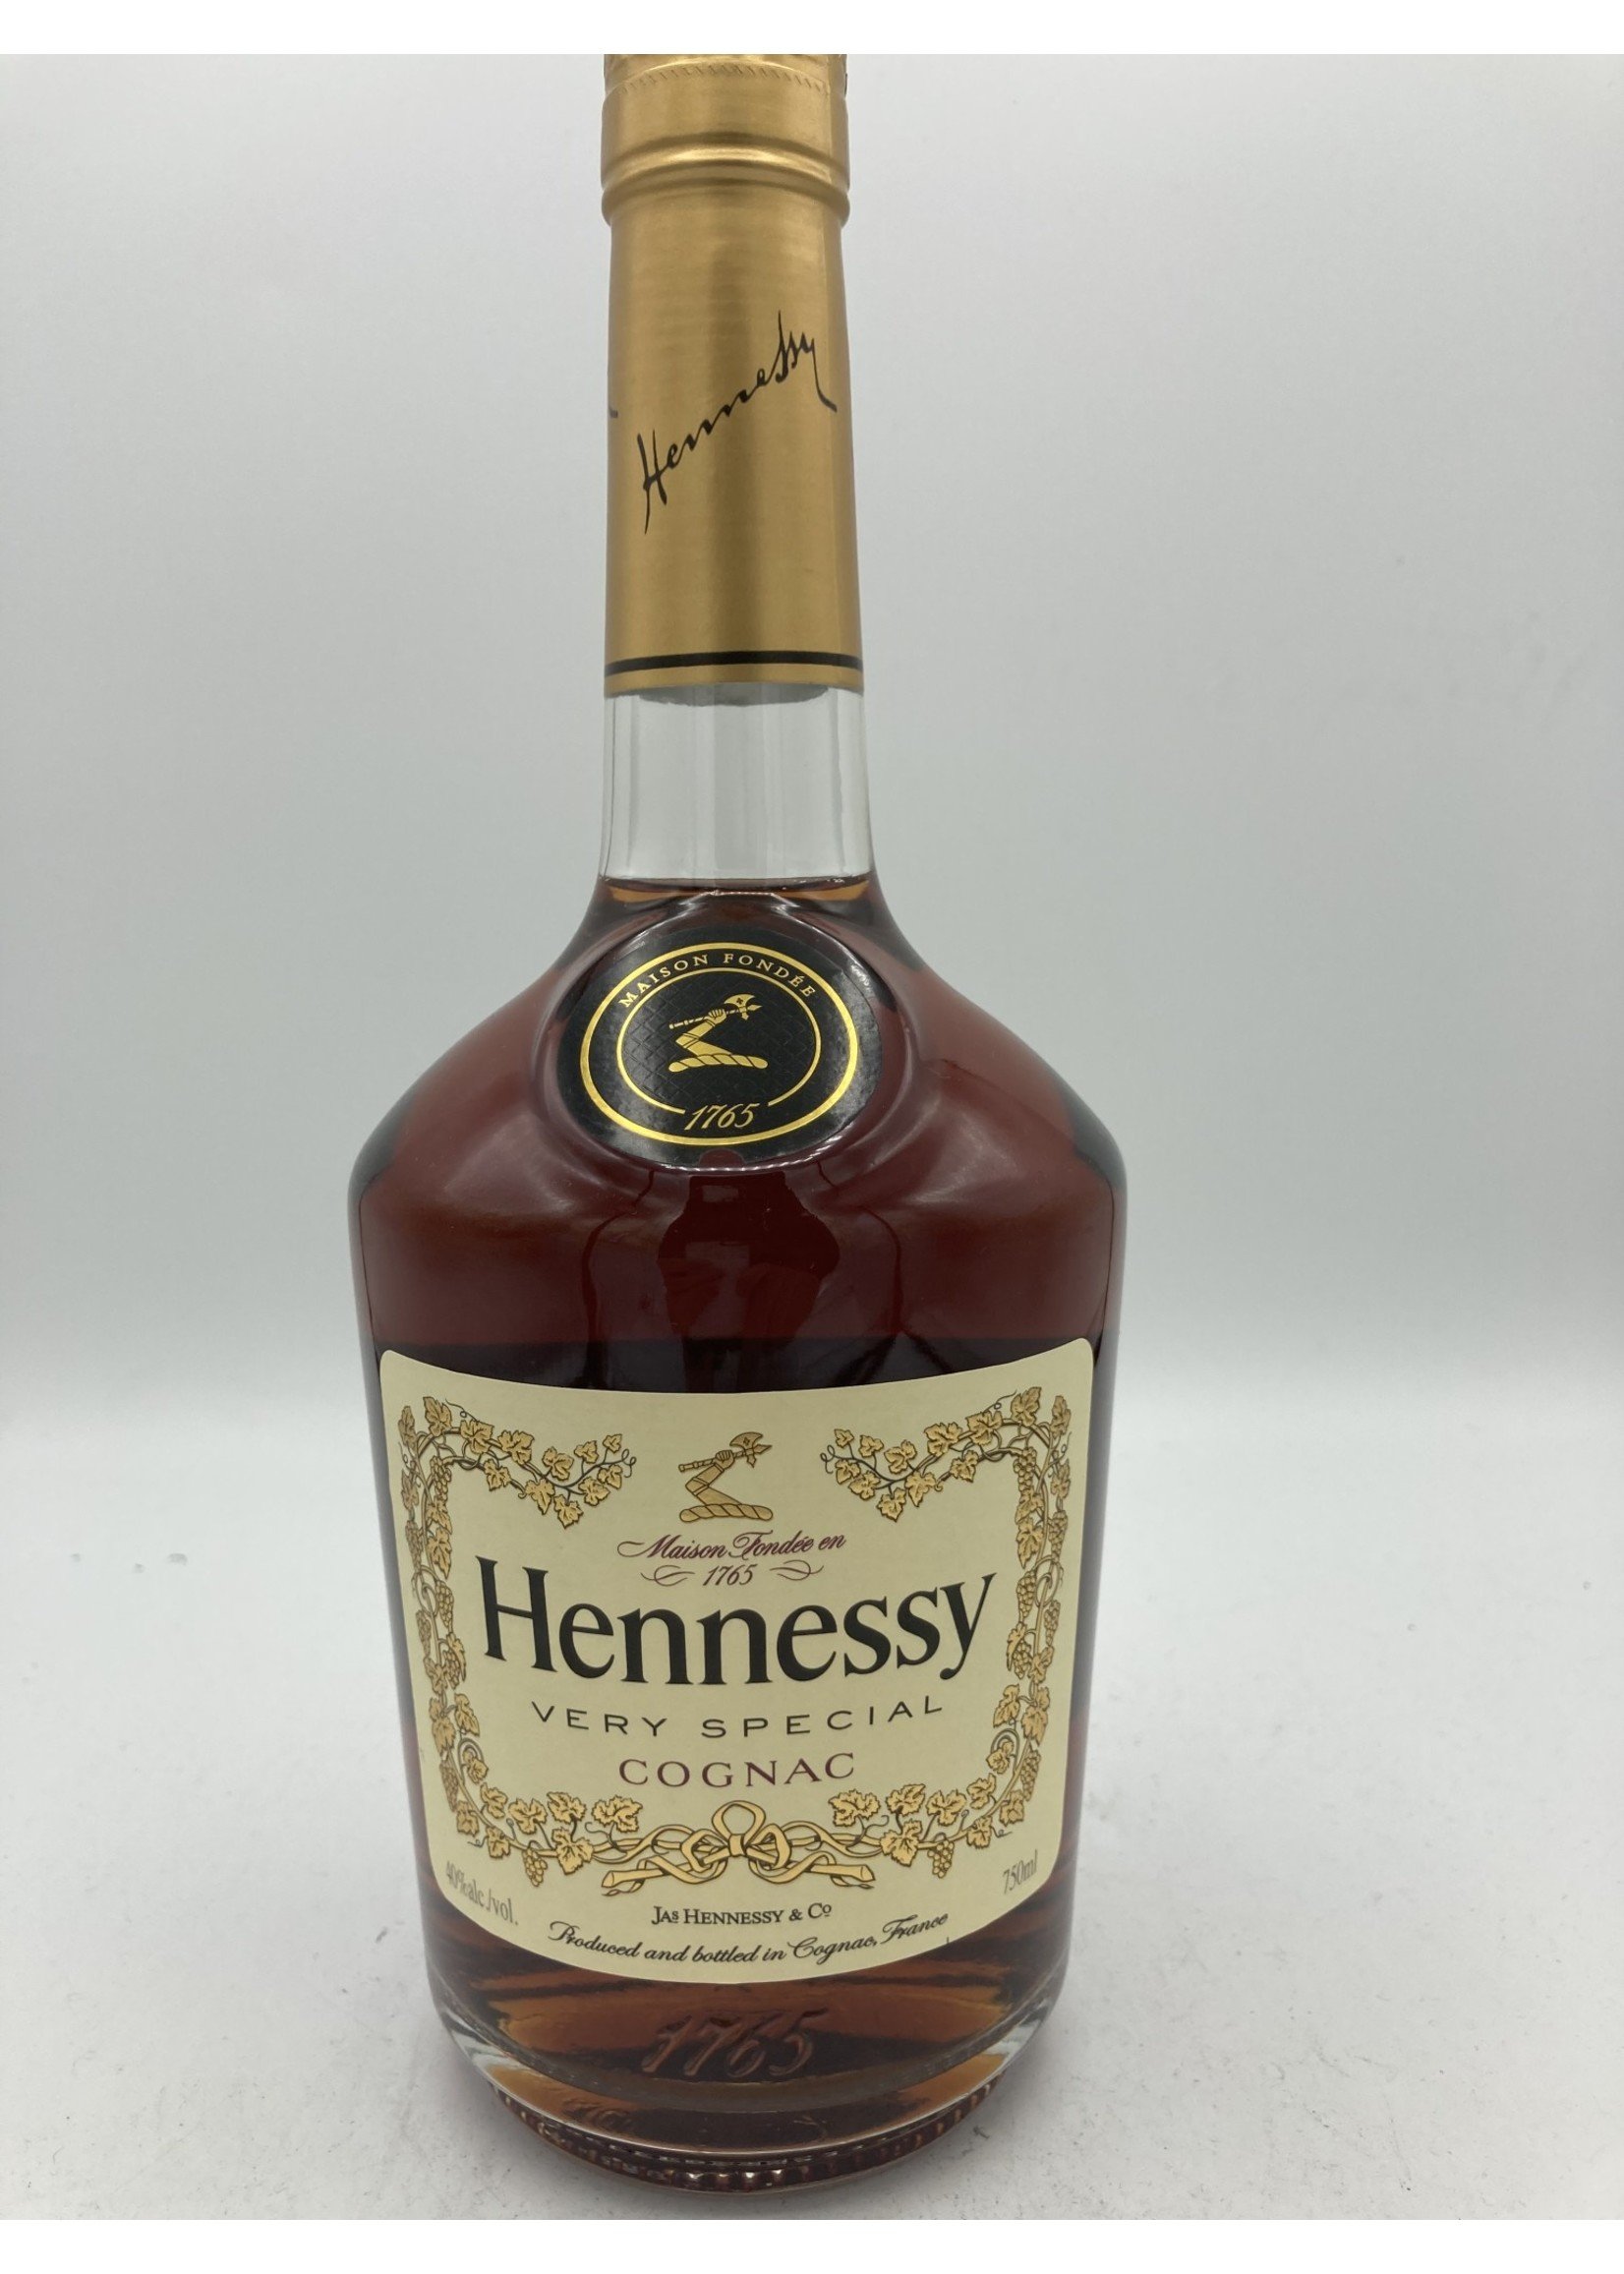 very abv special cognac proof 750ml 80 Holly 40% Main liquor Hennessy -